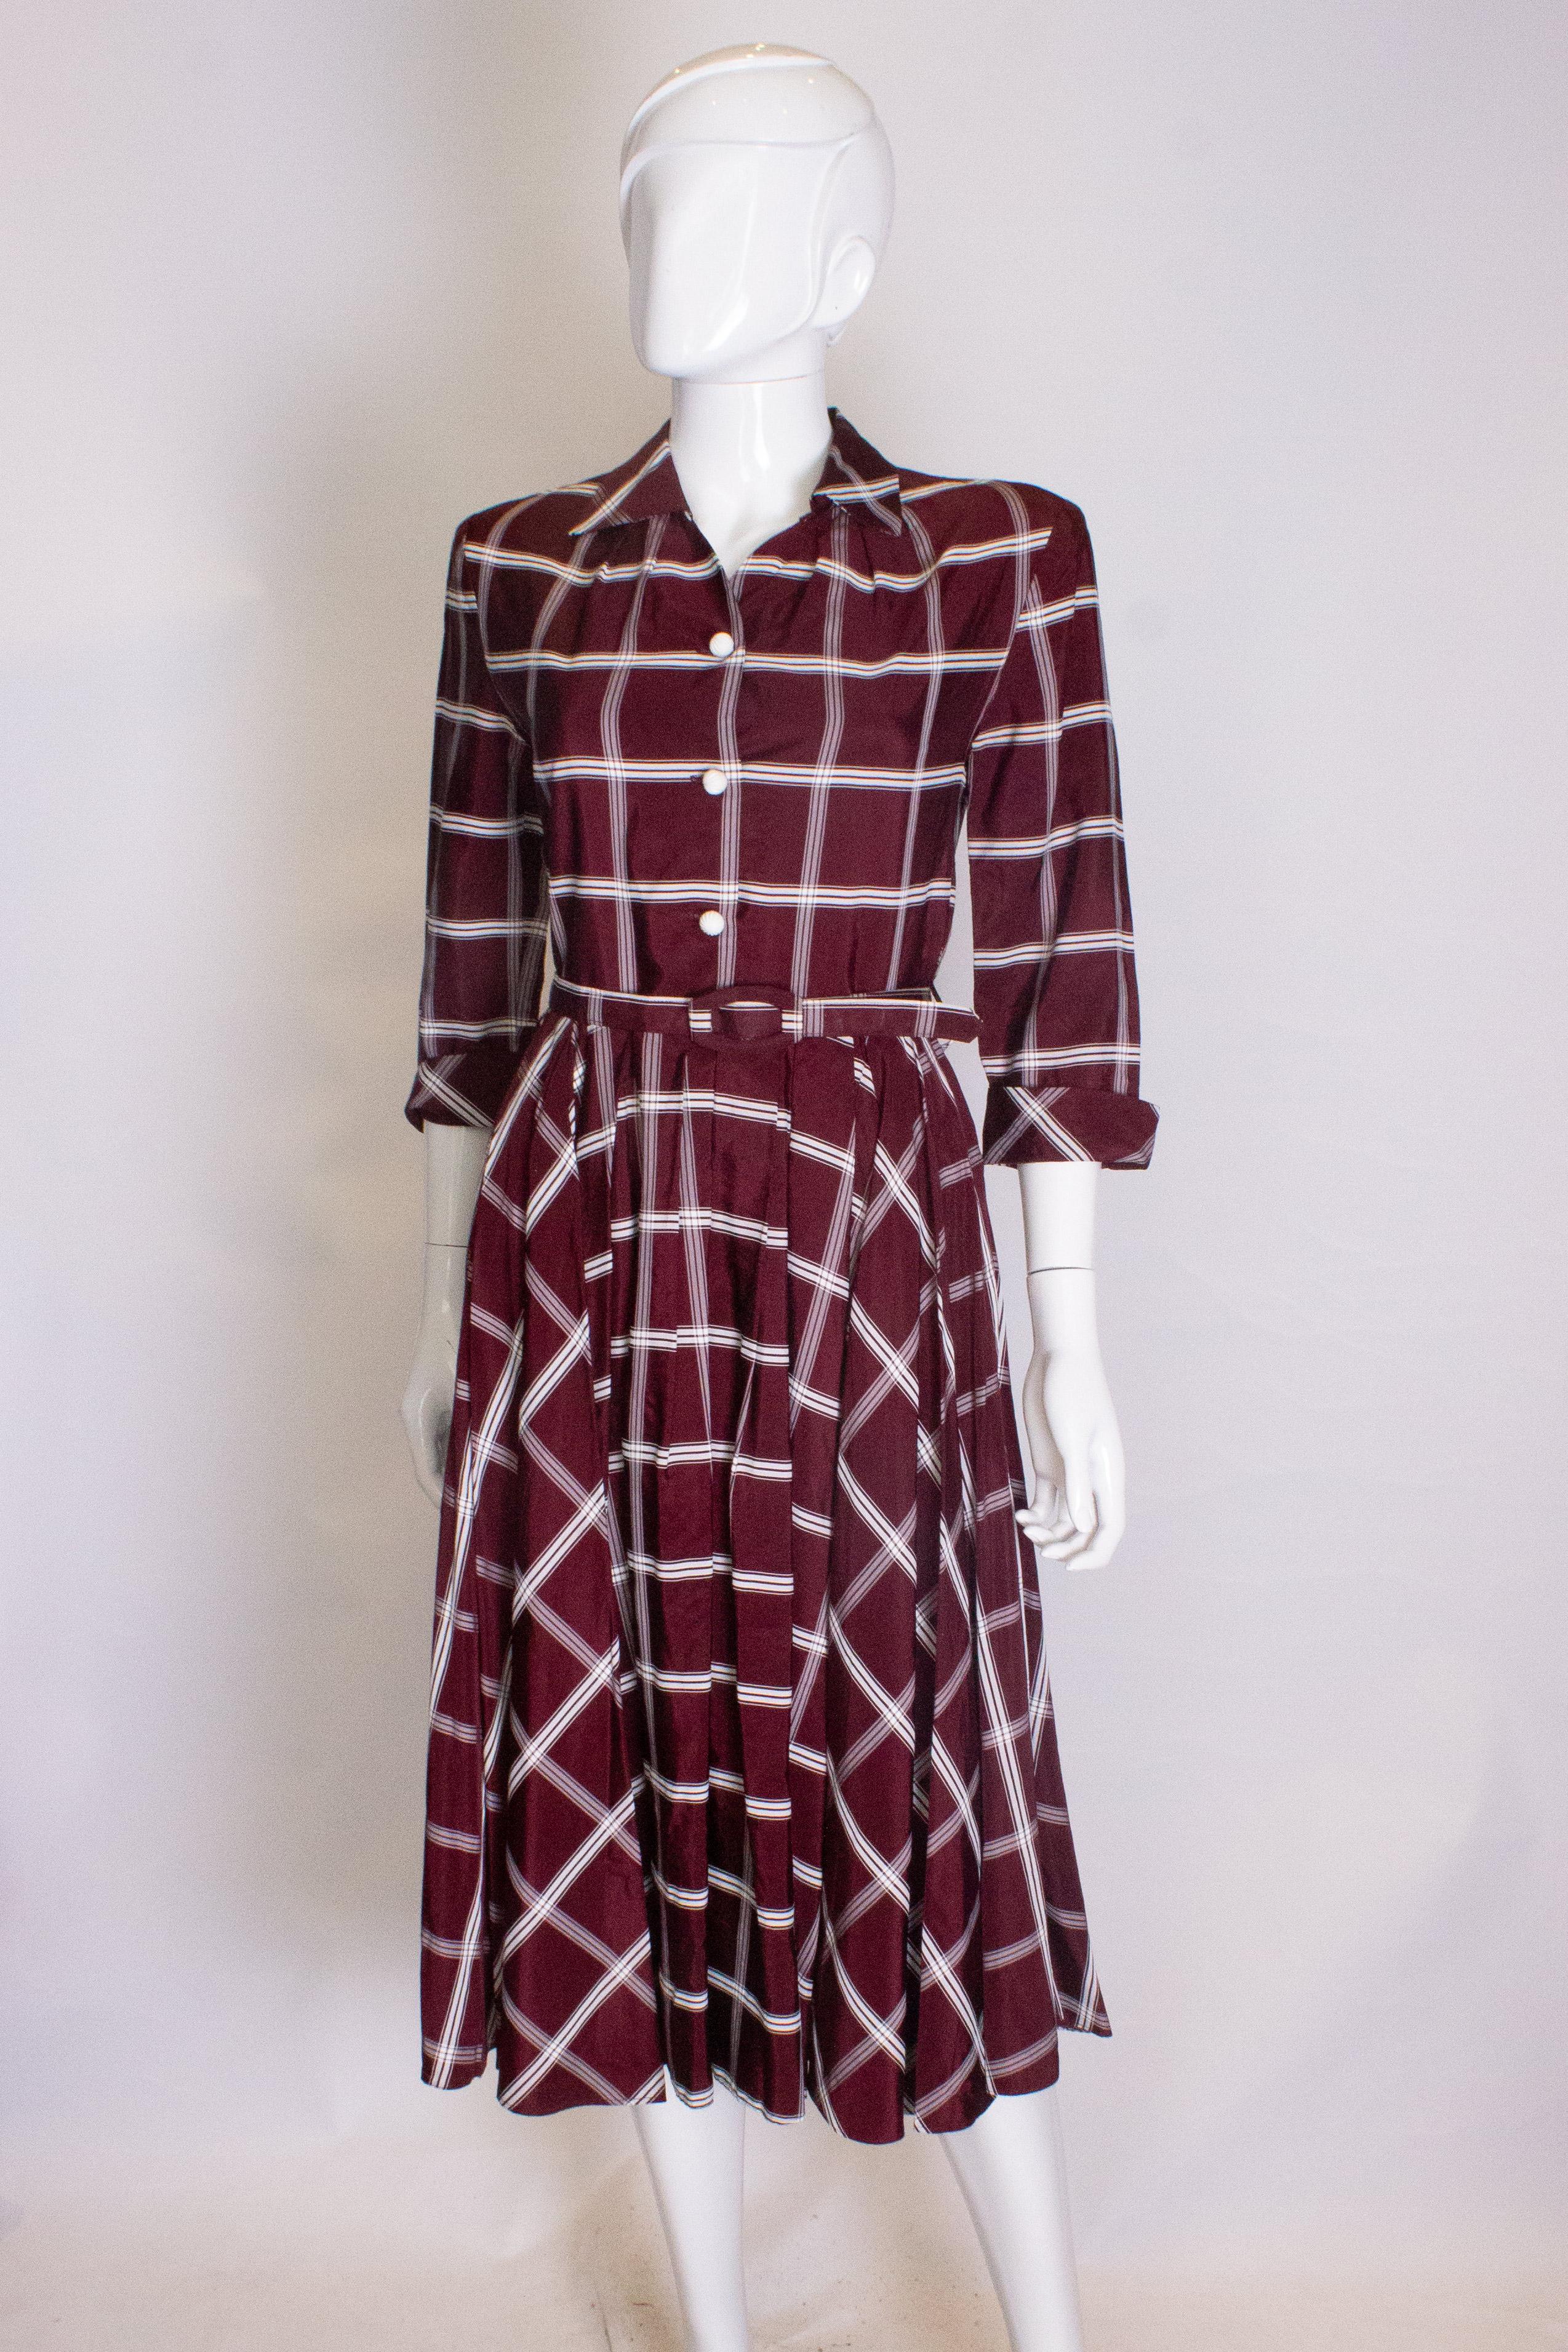 A head turning shirt dress in burgundy with white detail. The dress has a shirt collar, v neckline and button front opening. It has elbow length sleeves with turn back cuffs, self fabric belt and pleats at the waist.